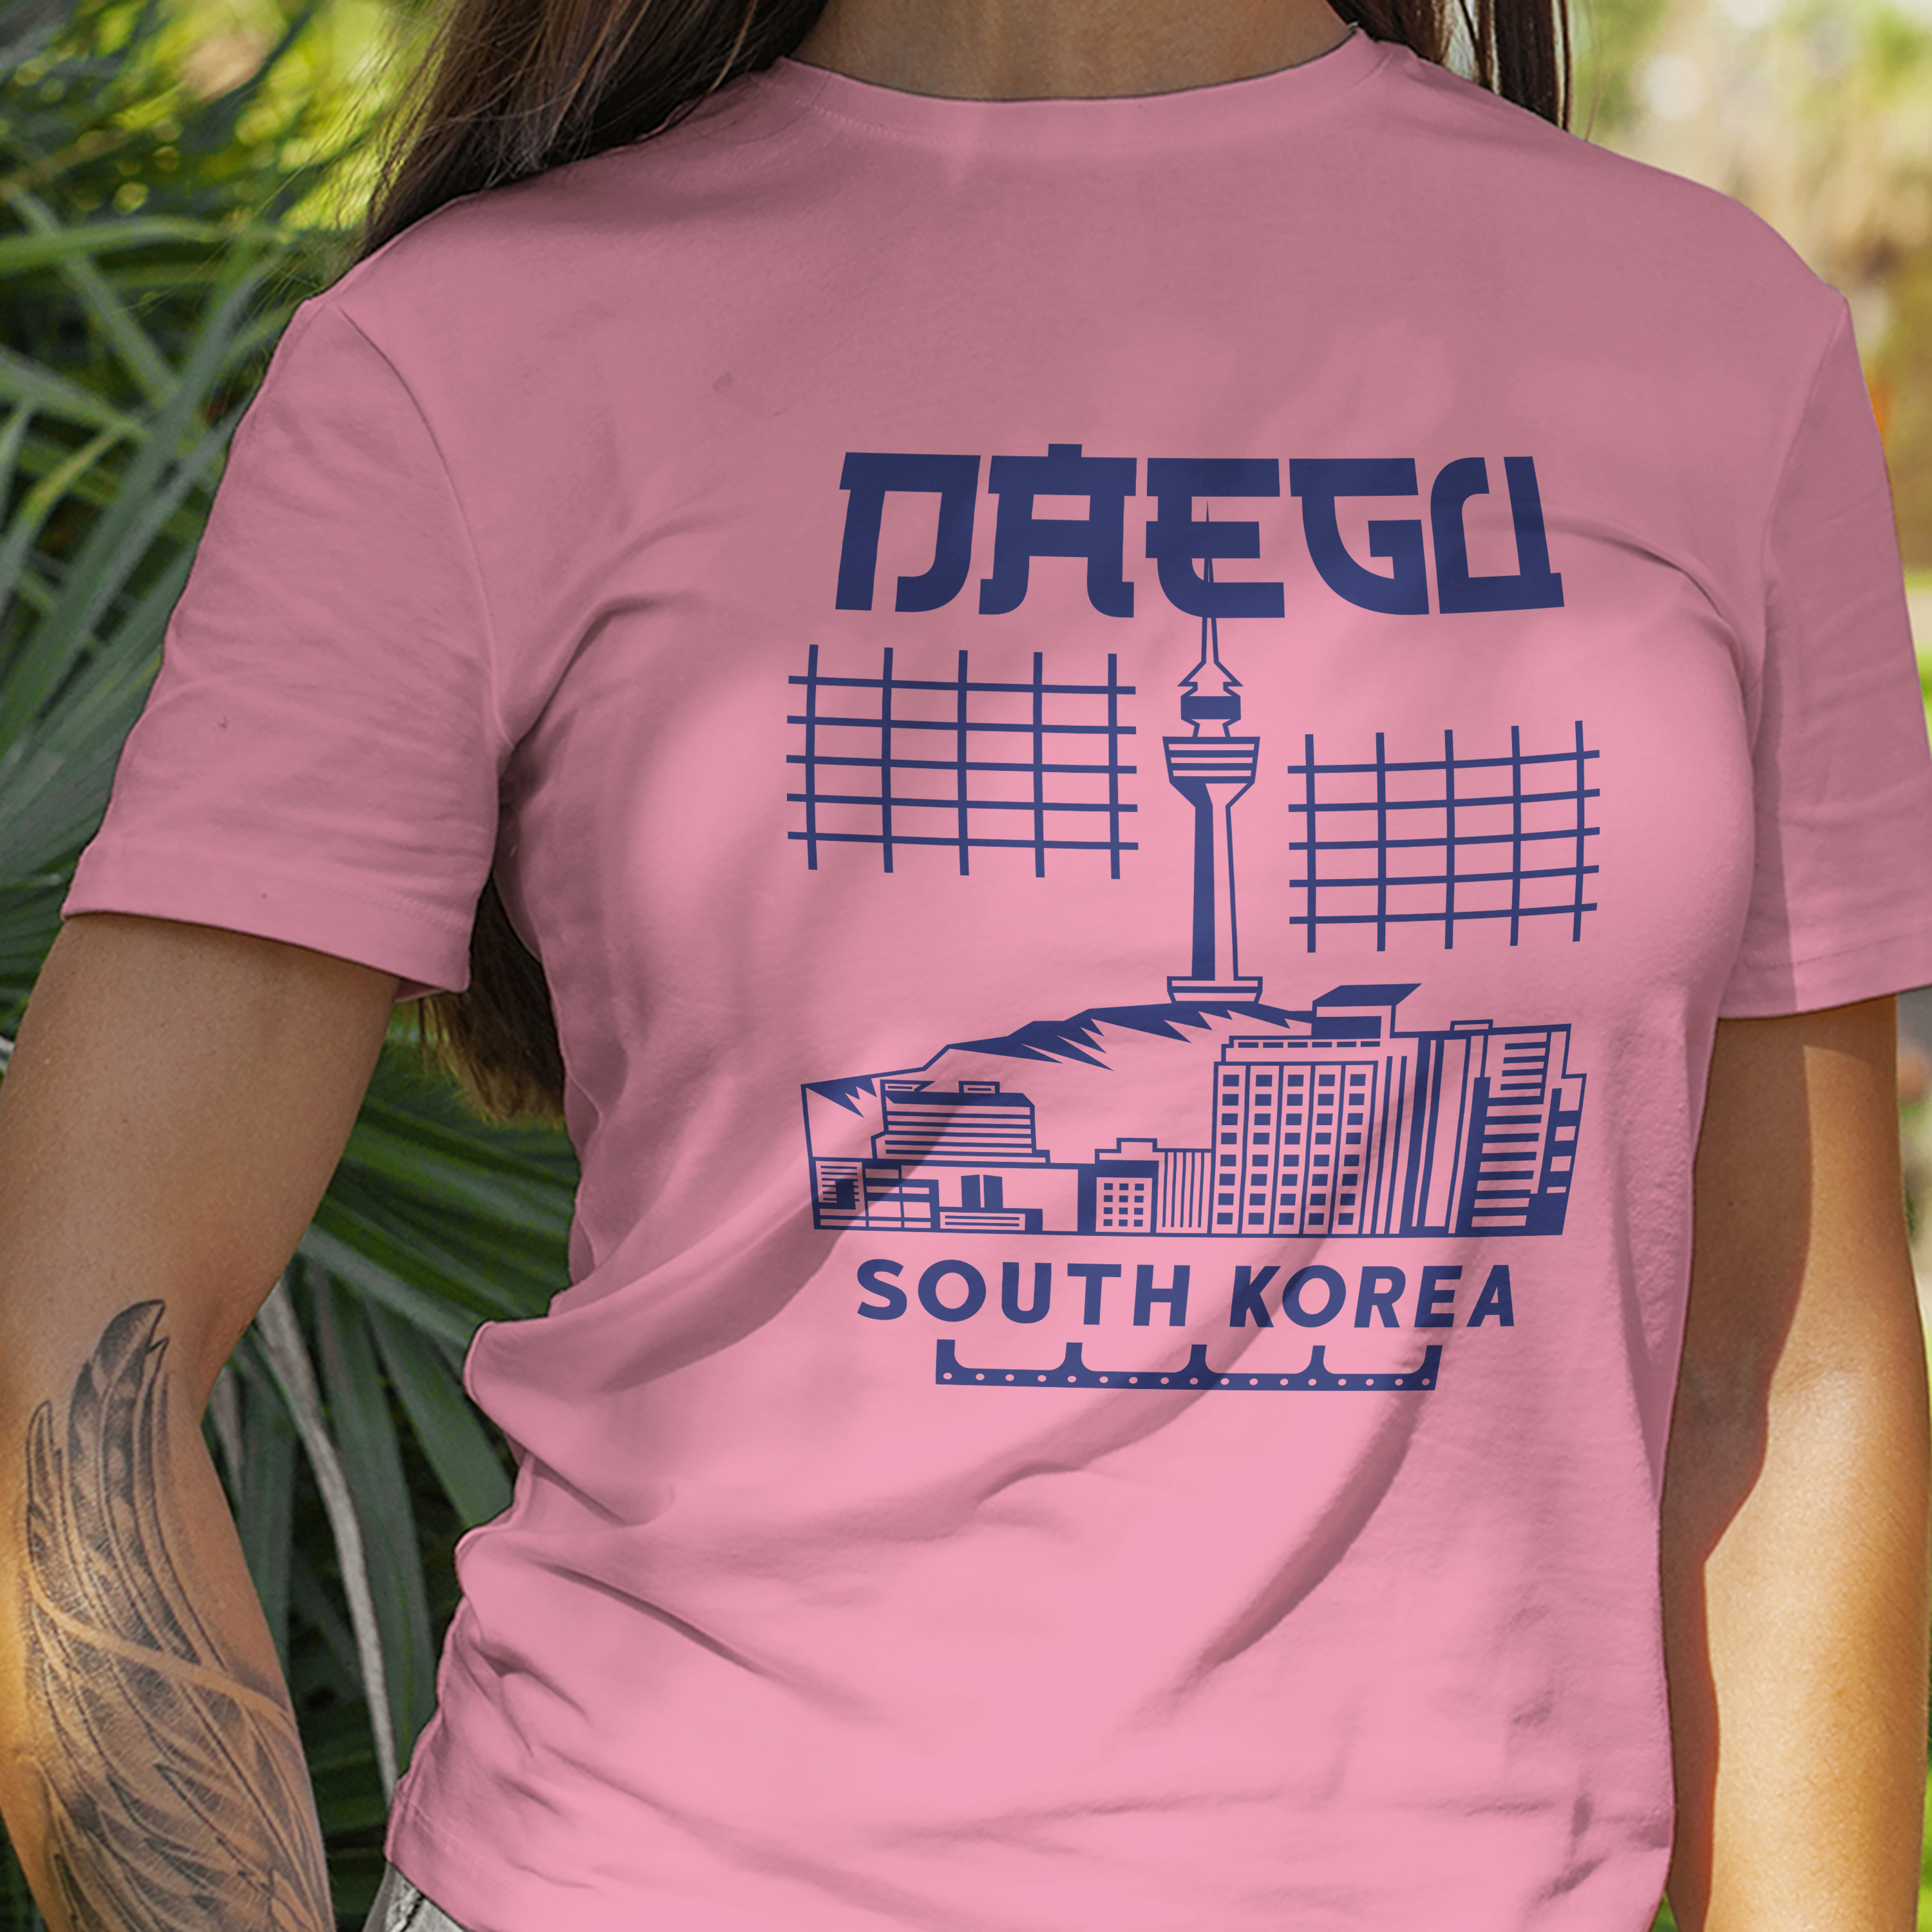 

South Korea Architectural Style Graphic Print T-shirt, Short Sleeve Crew Neck Casual Top For Summer & Spring, Women's Clothing